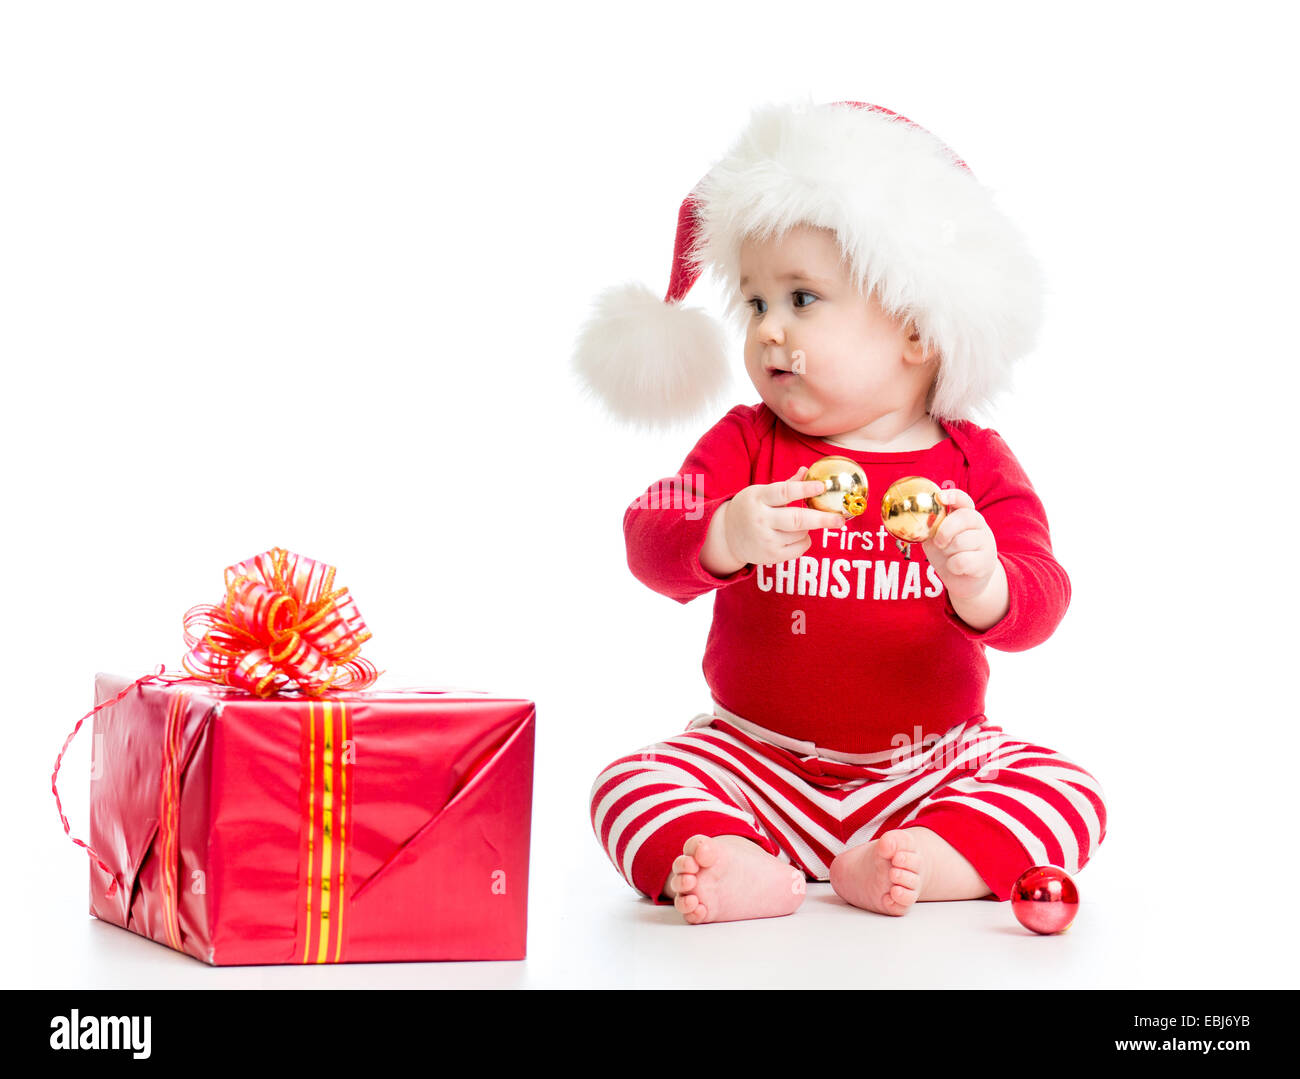 Baby in Santa hat with Christmas gift box isolated Banque D'Images